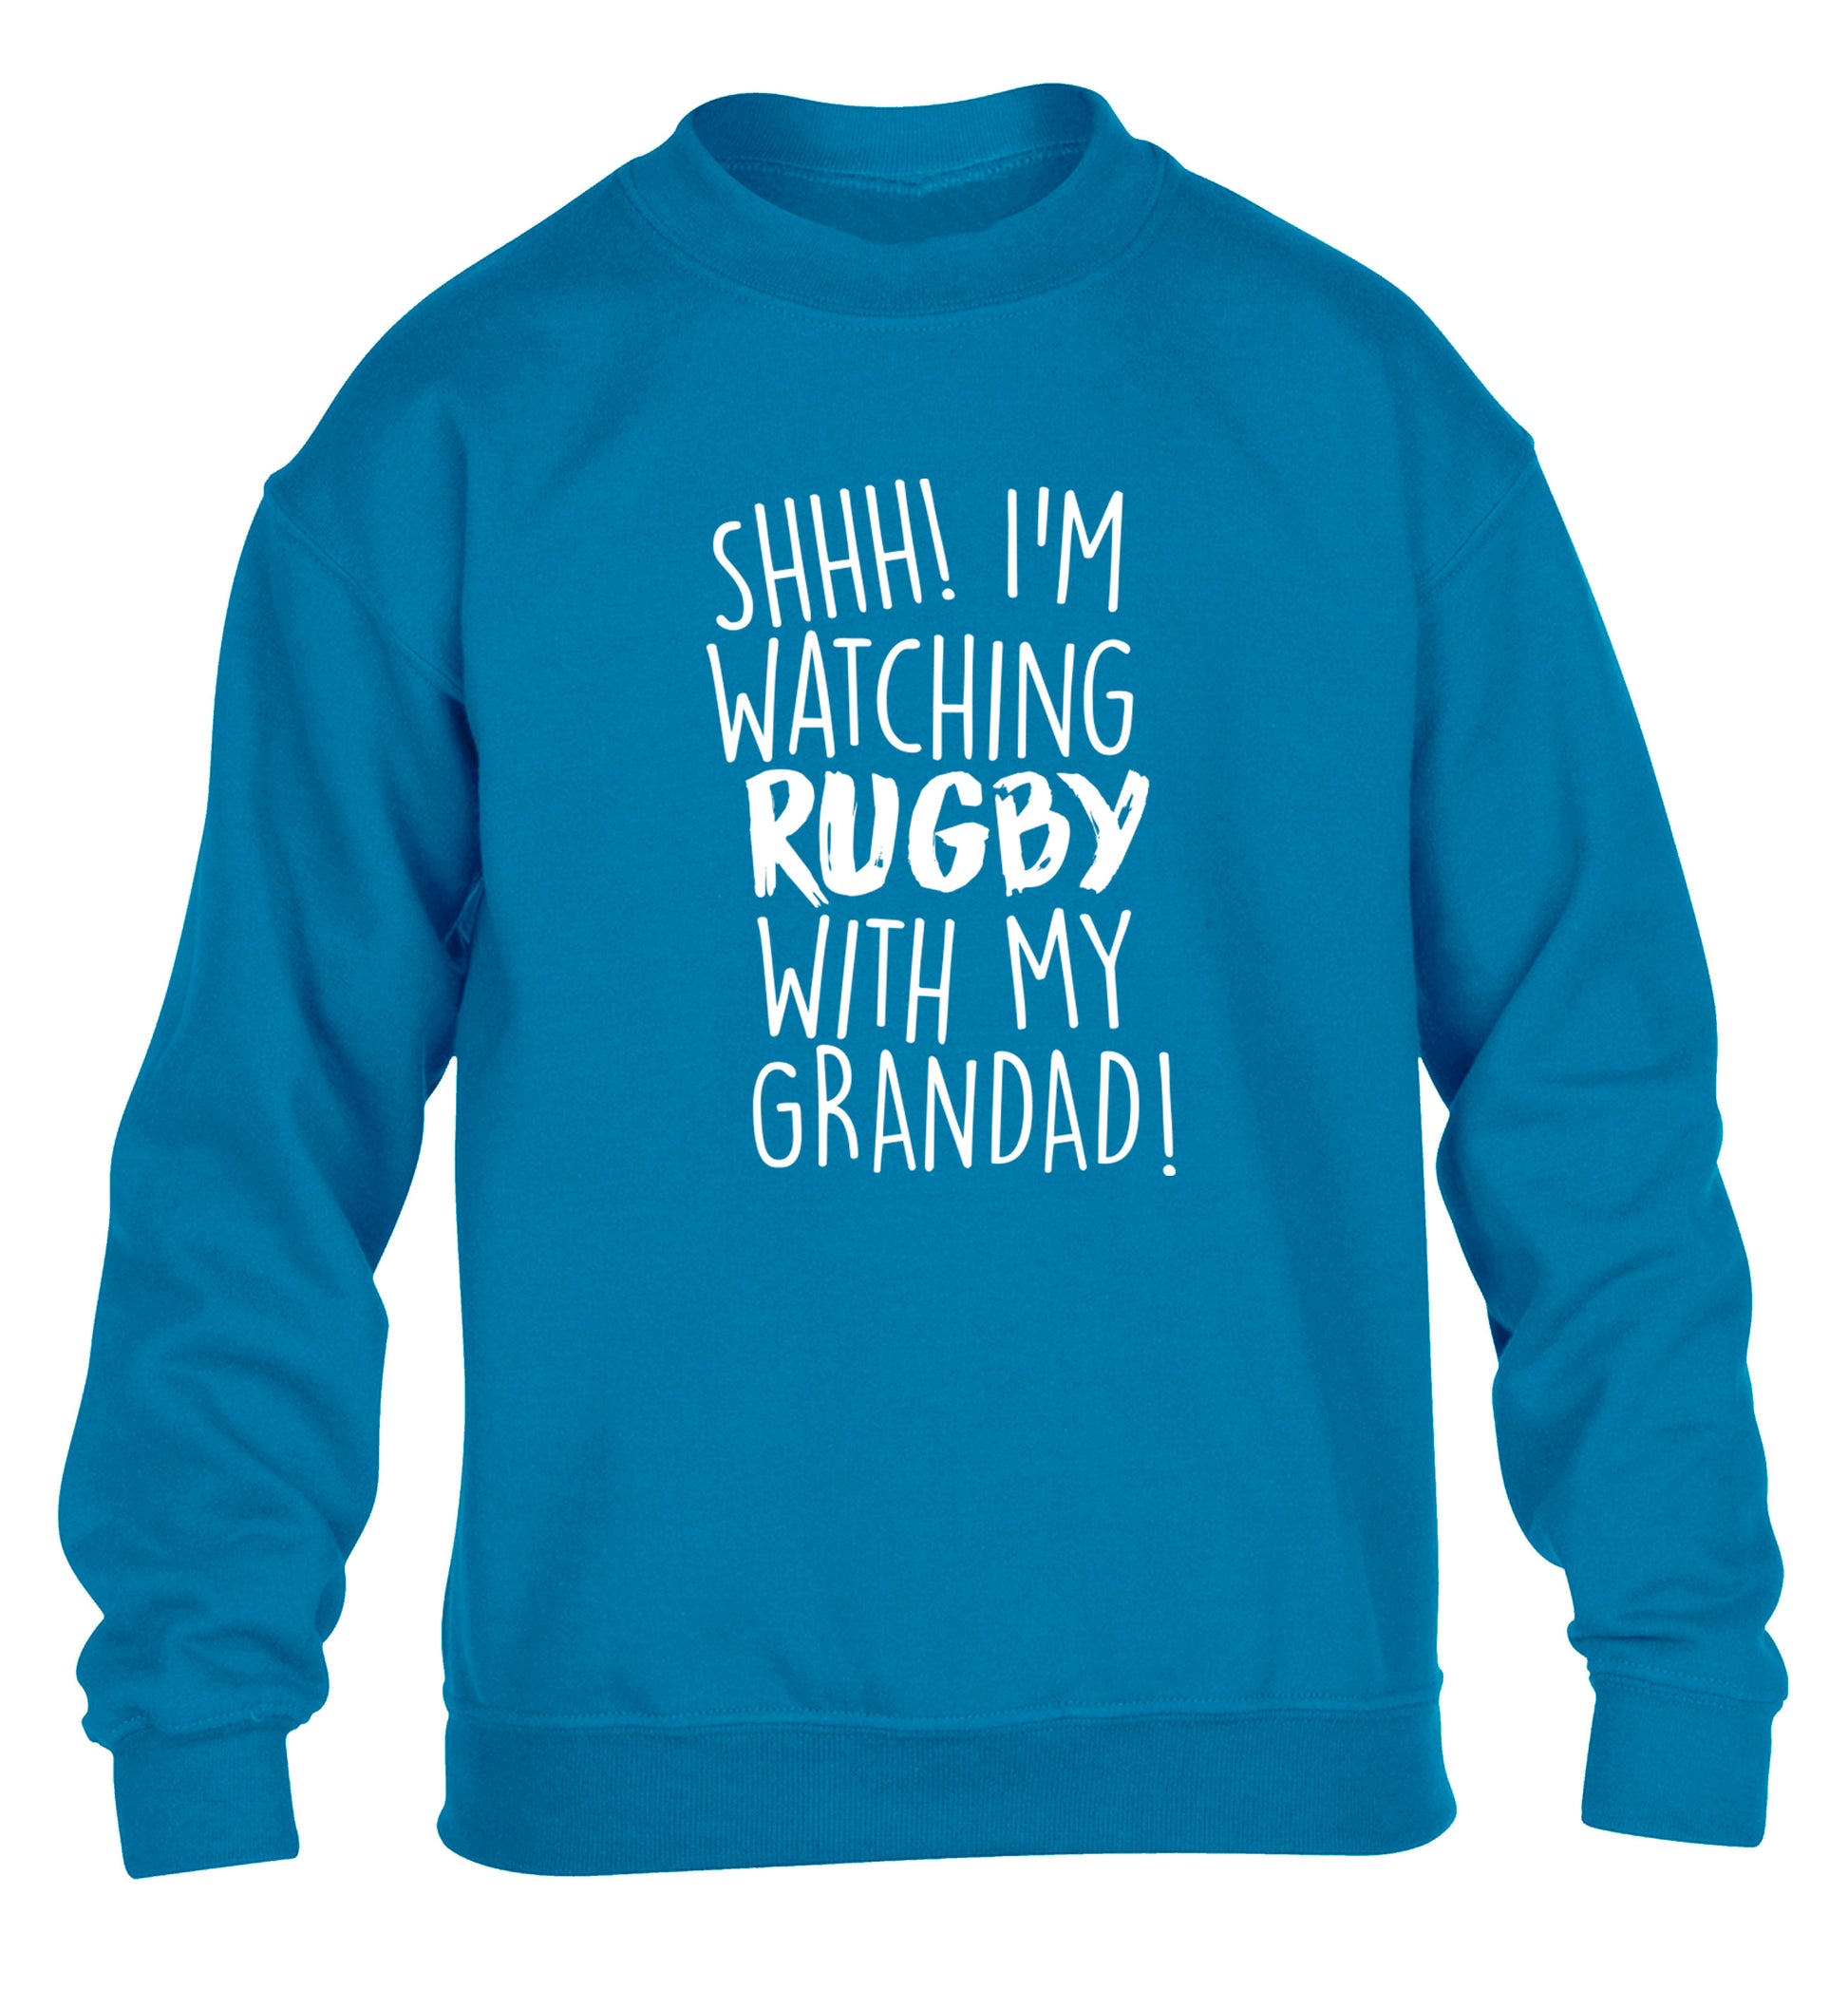 Shh I'm watching rugby with my grandaughter children's blue sweater 12-13 Years